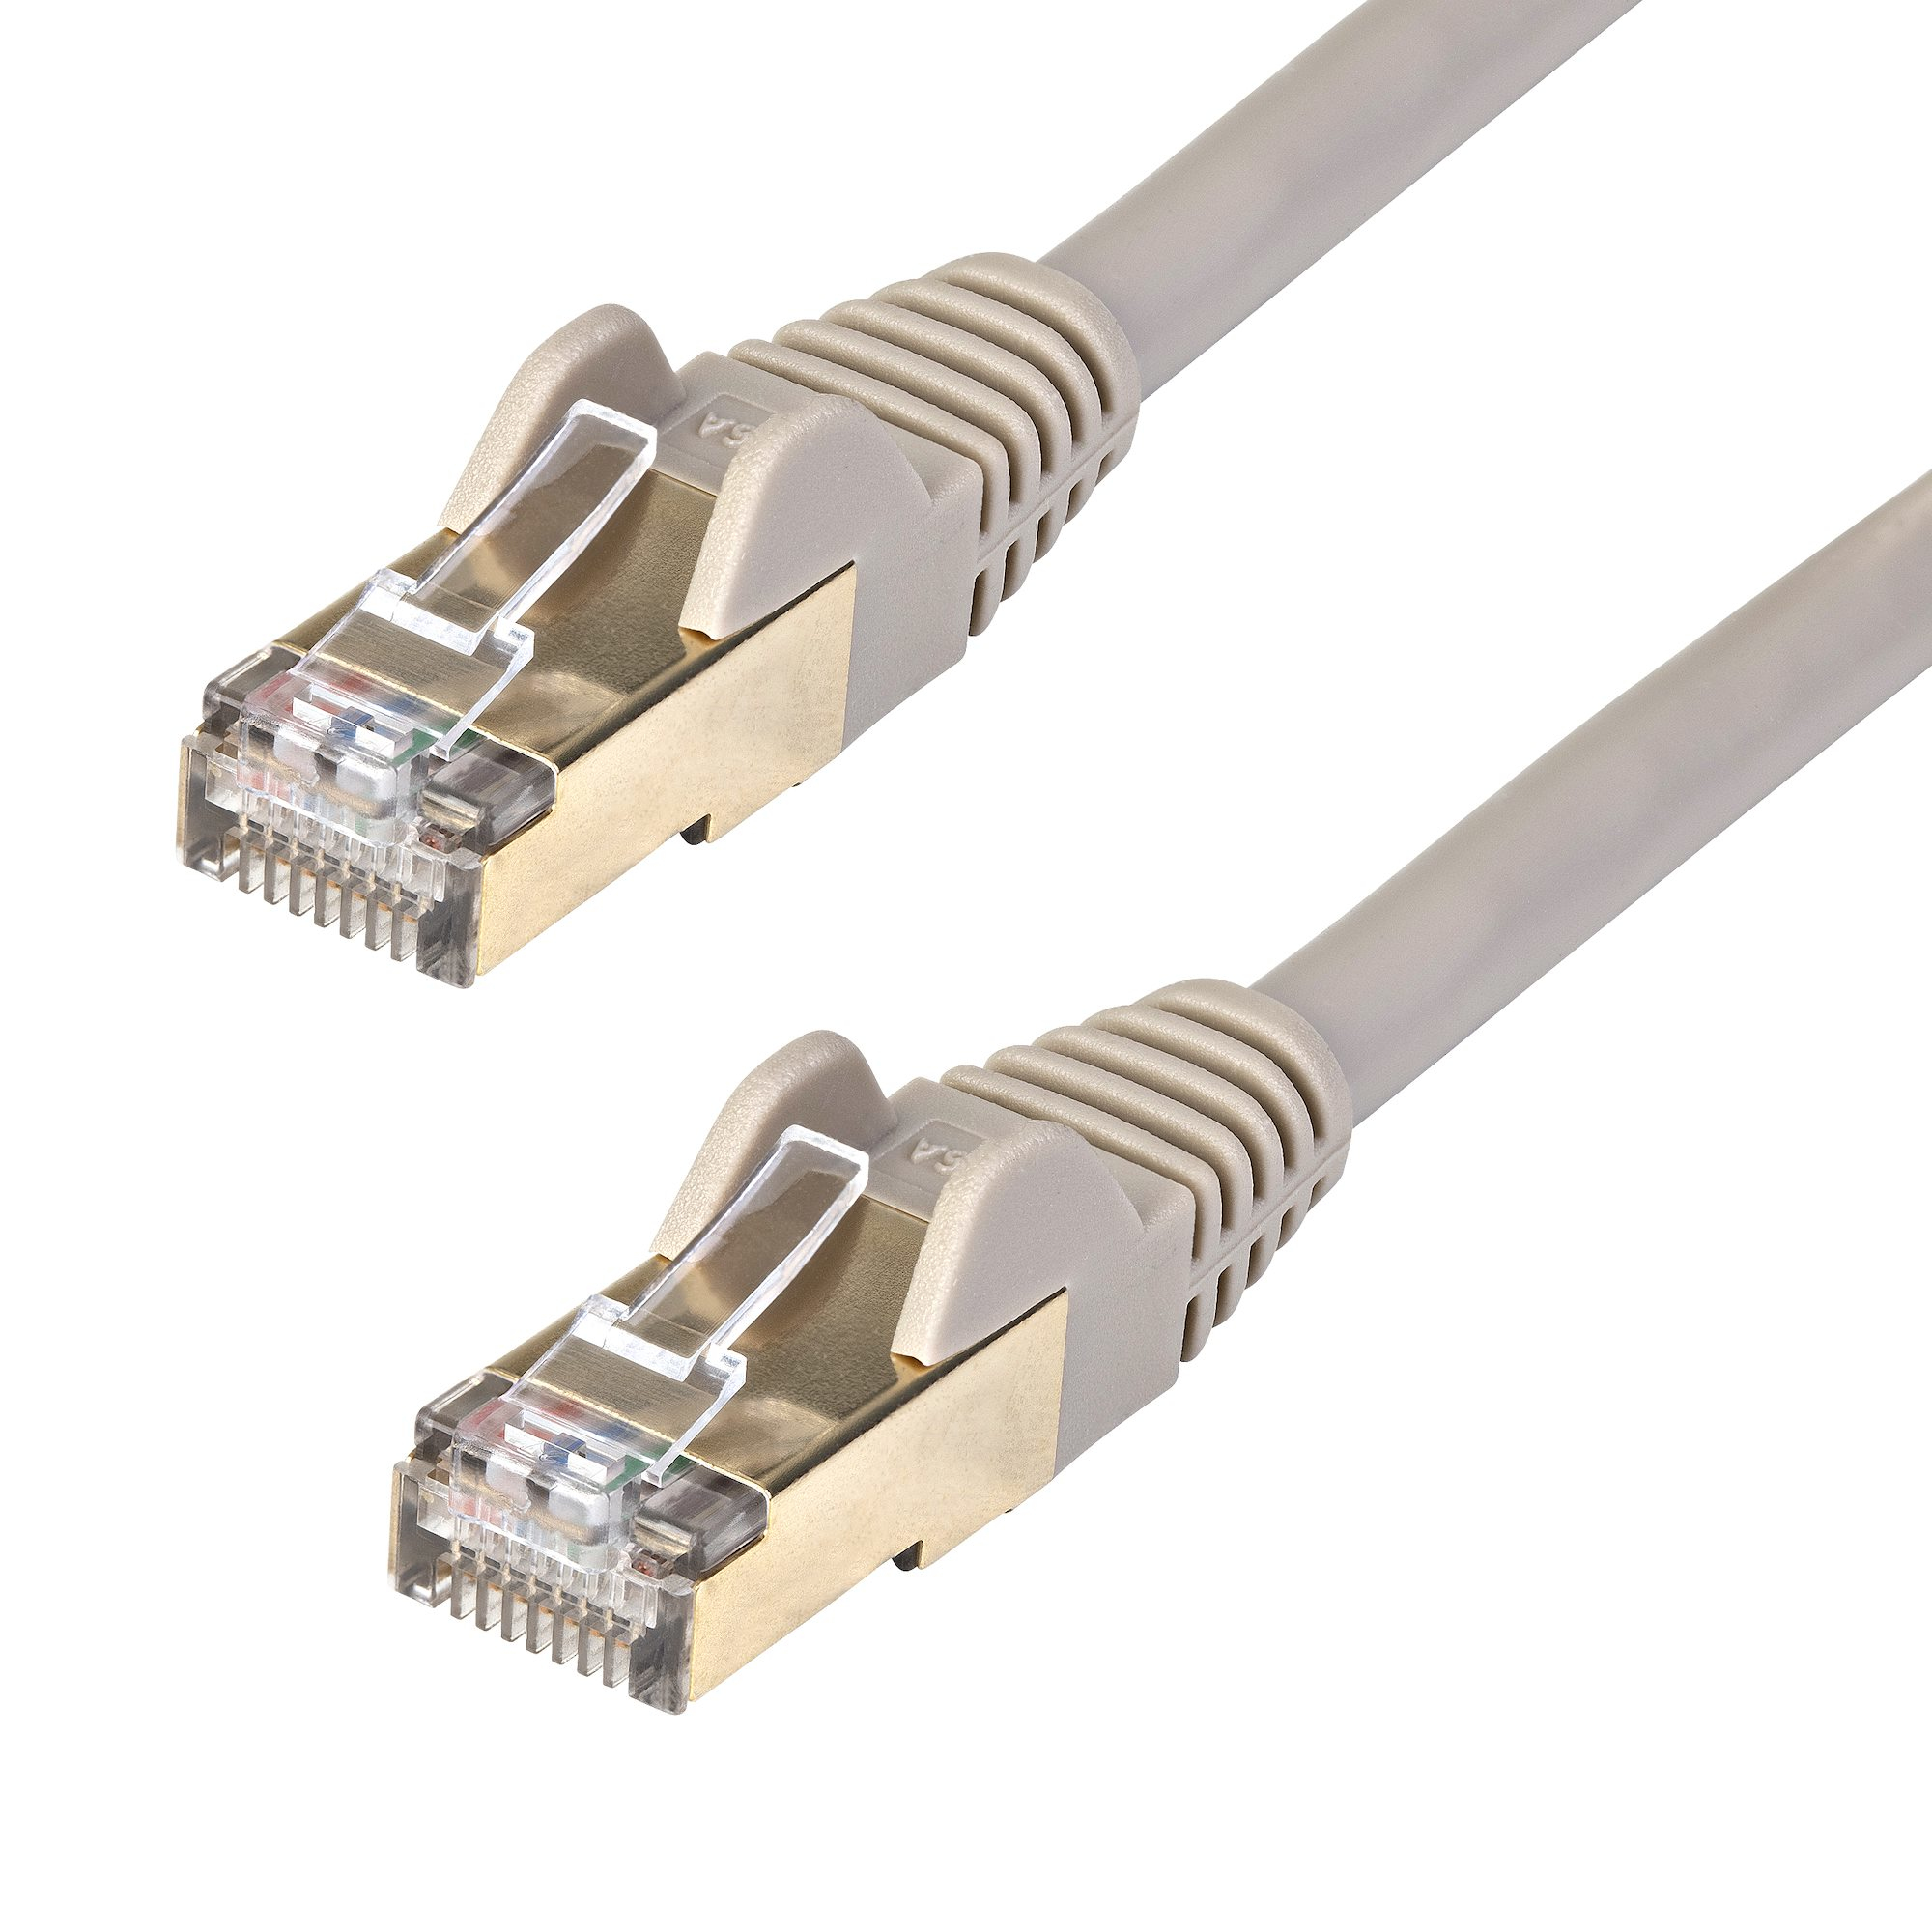 StarTech.com 7m CAT6a Ethernet Cable - 10 Gigabit Shielded Snagless RJ45 100W PoE Patch Cord - 10GbE STP Network Cable w/Strain Relief - Grey Fluke Tested/Wiring is UL Certified/TIA